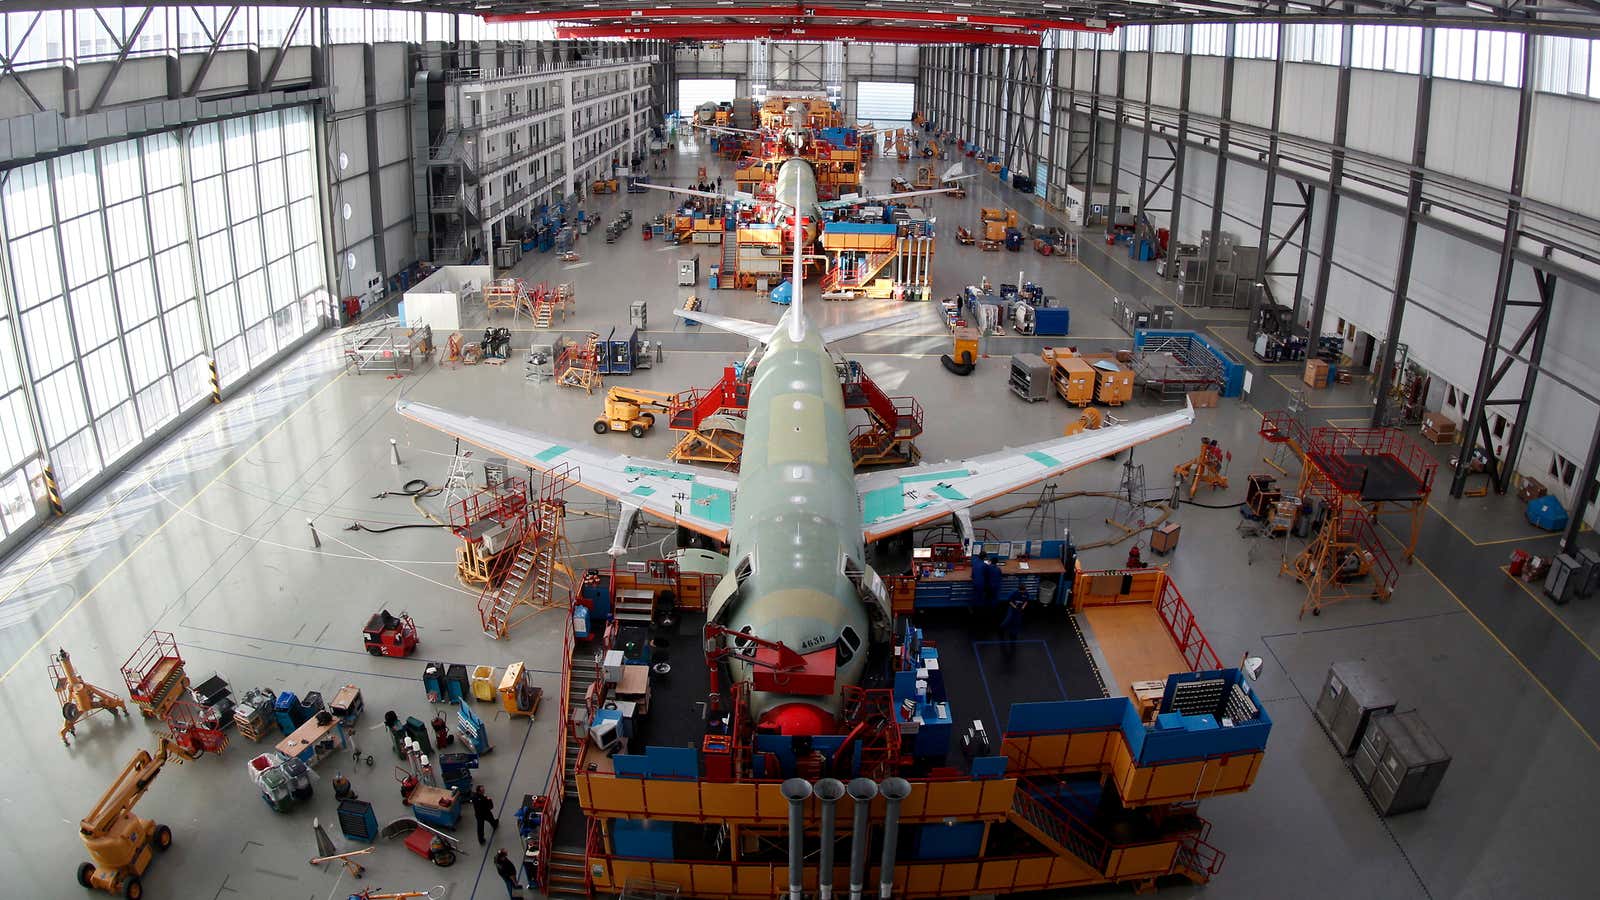 Building aircraft is complex enough without having to balance the political interests of two different countries.